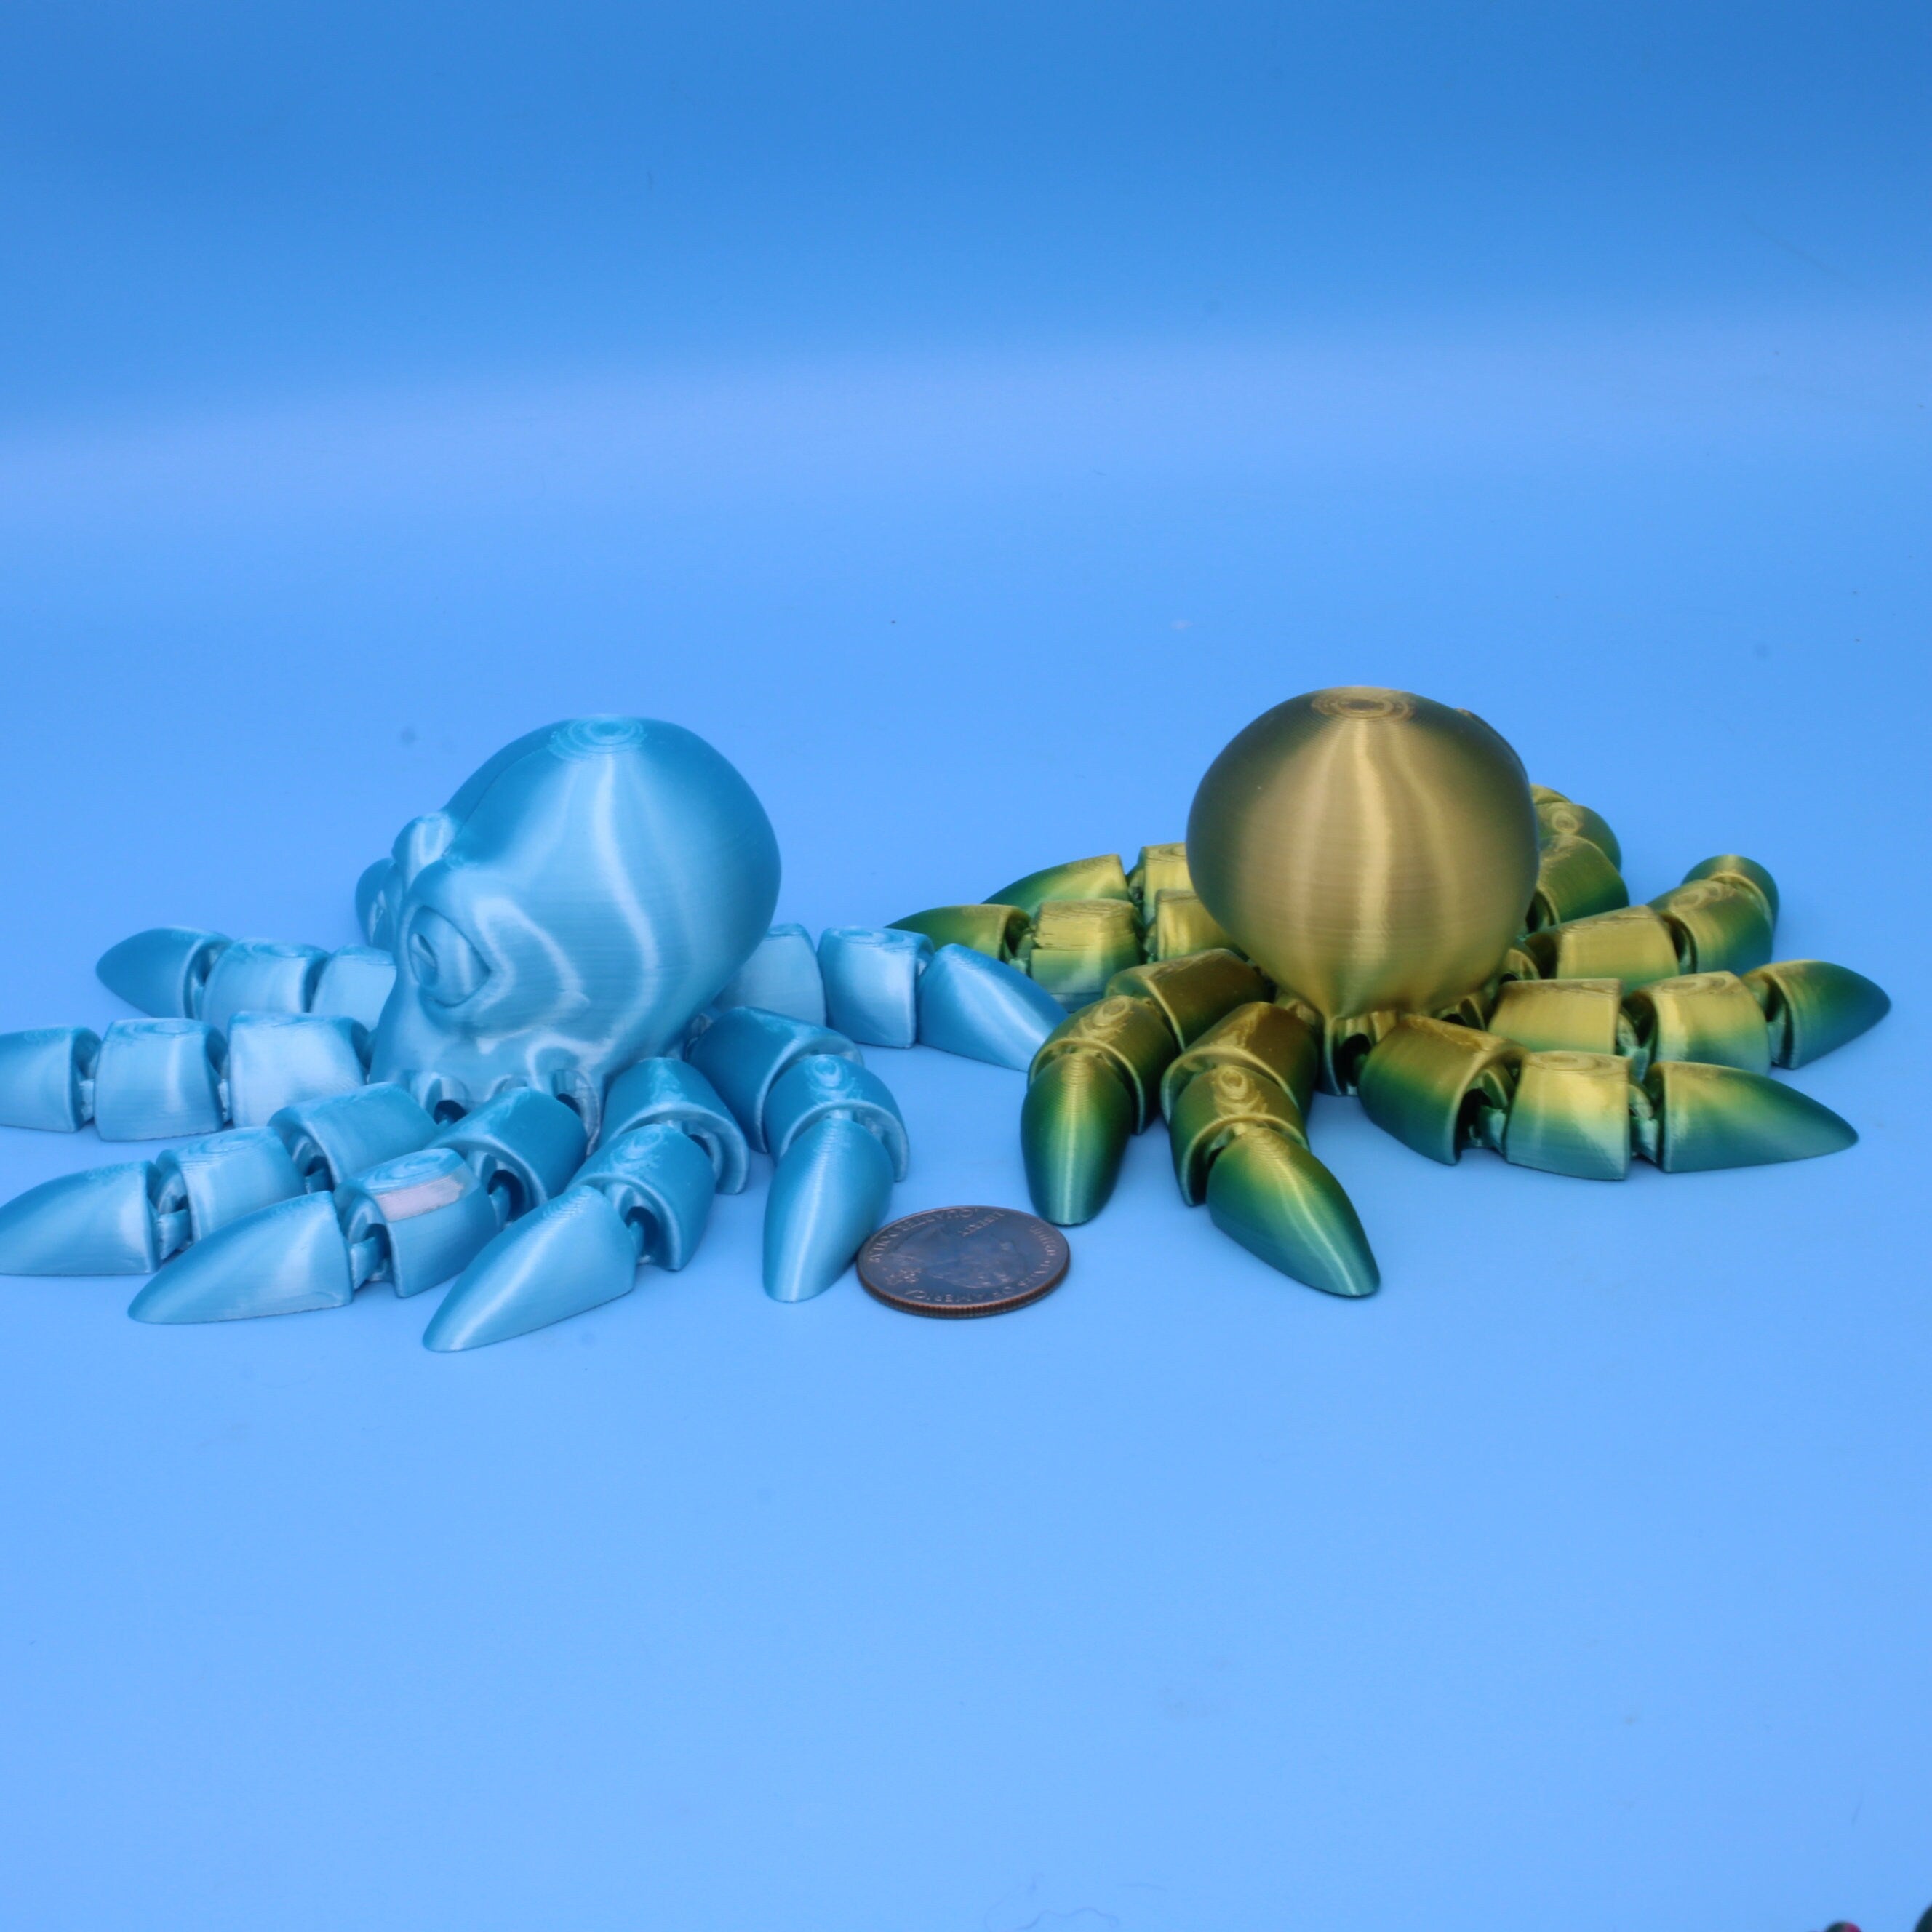 Clingy The Octopus Set - 3D Printed